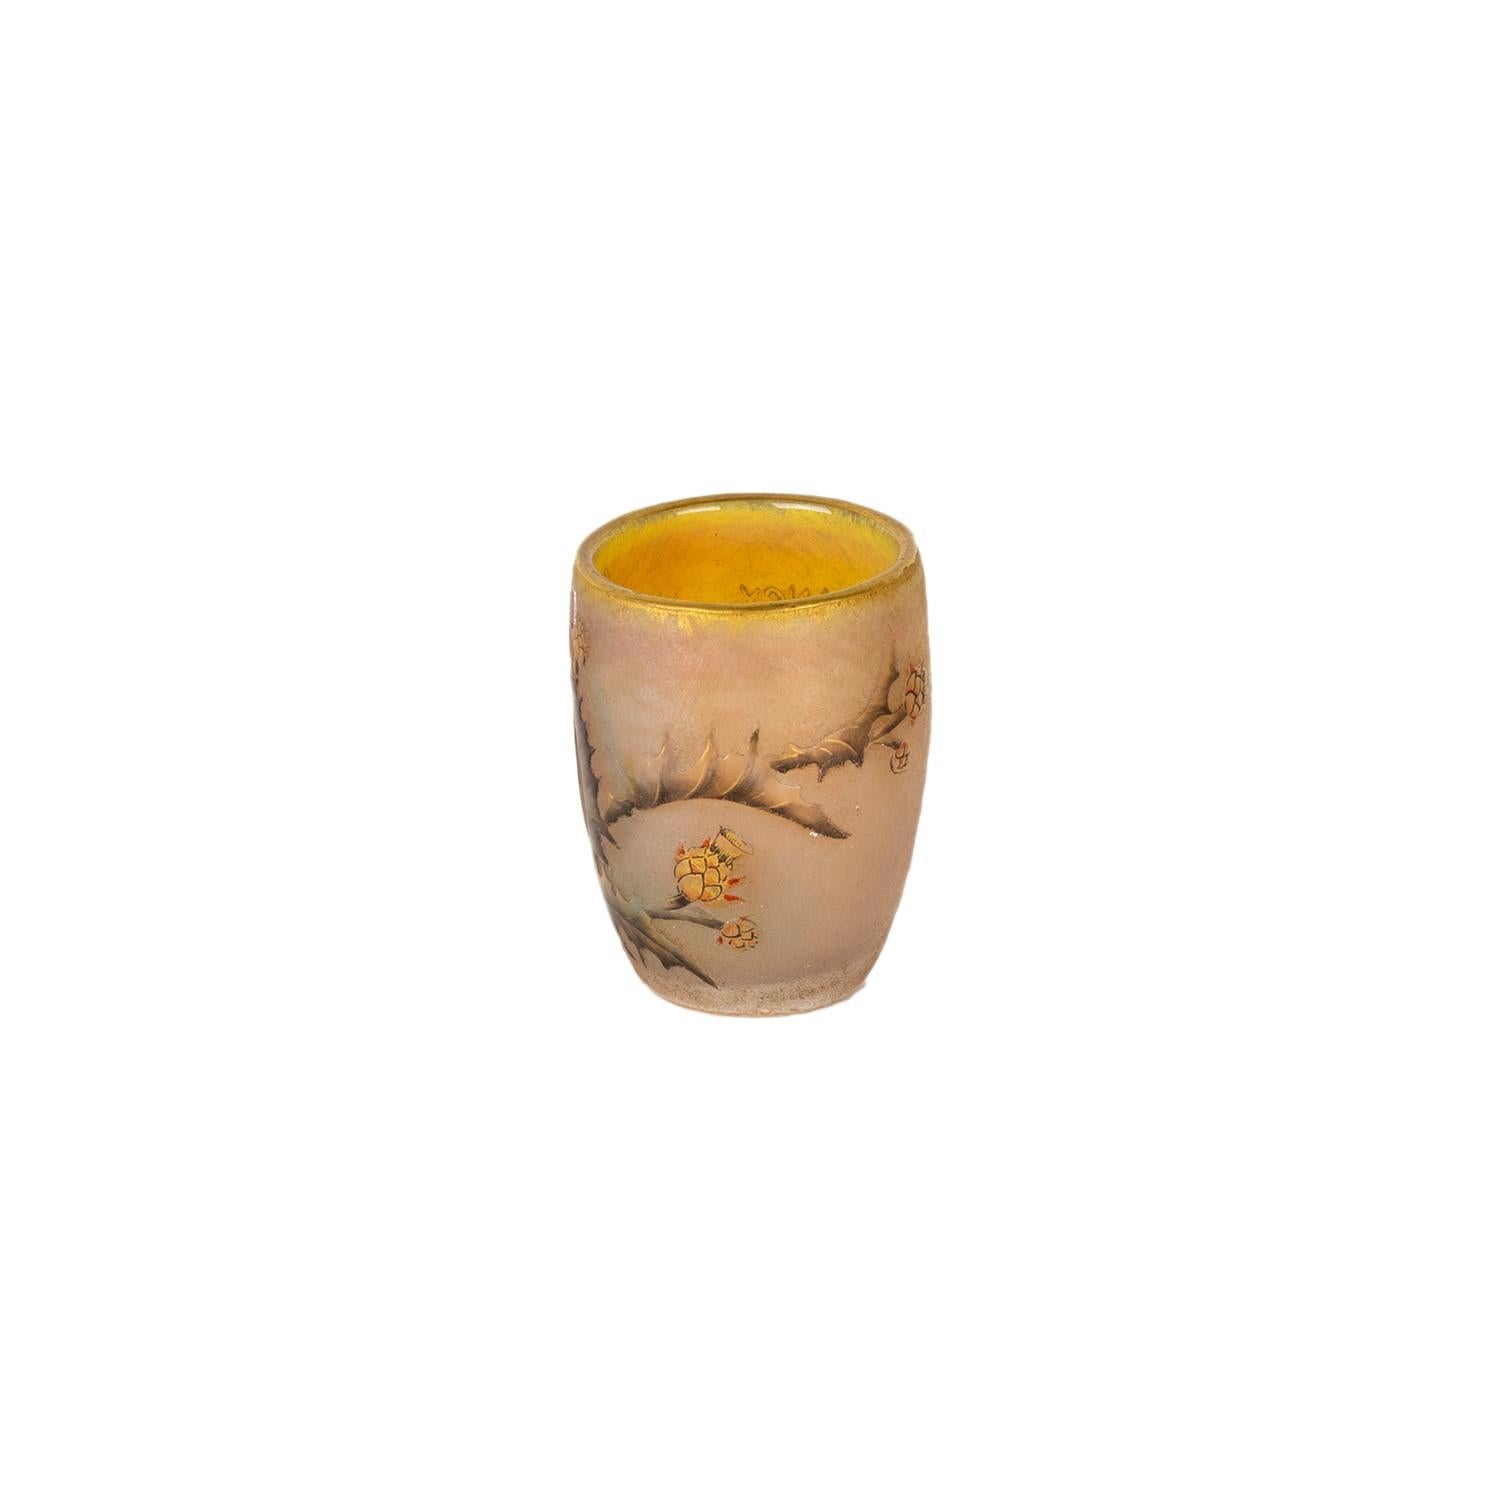 A multi-layered glass proof chalice / goblet with acid-etched and polychrome enameled decoration on a yellow shaded background with signed «Nancy», the Cross of Lorraine and the mark “1906” of the date.
